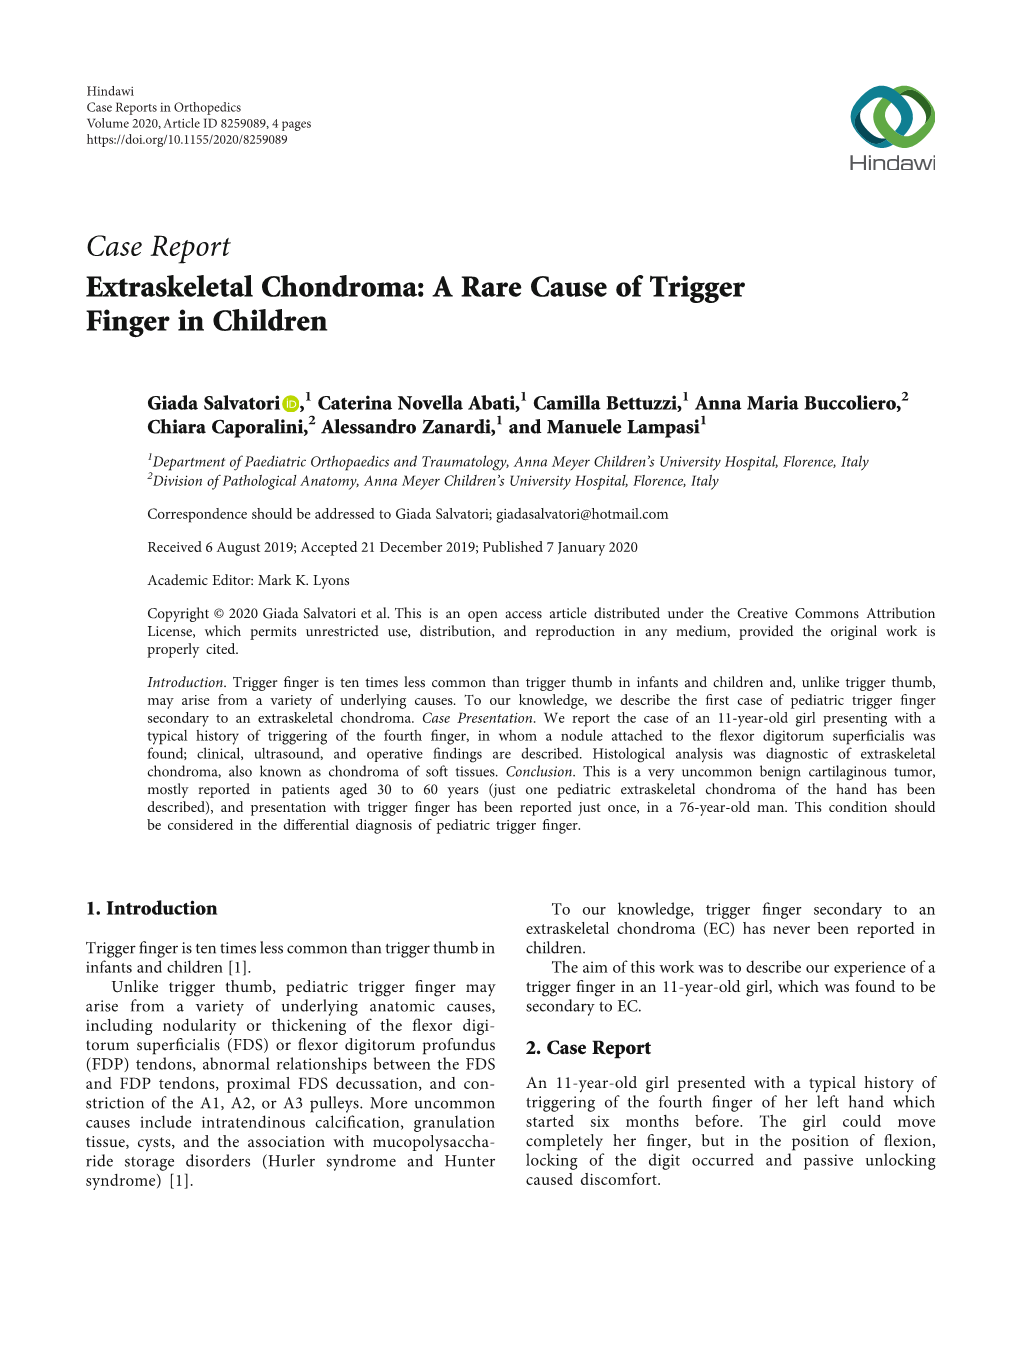 Extraskeletal Chondroma: a Rare Cause of Trigger Finger in Children